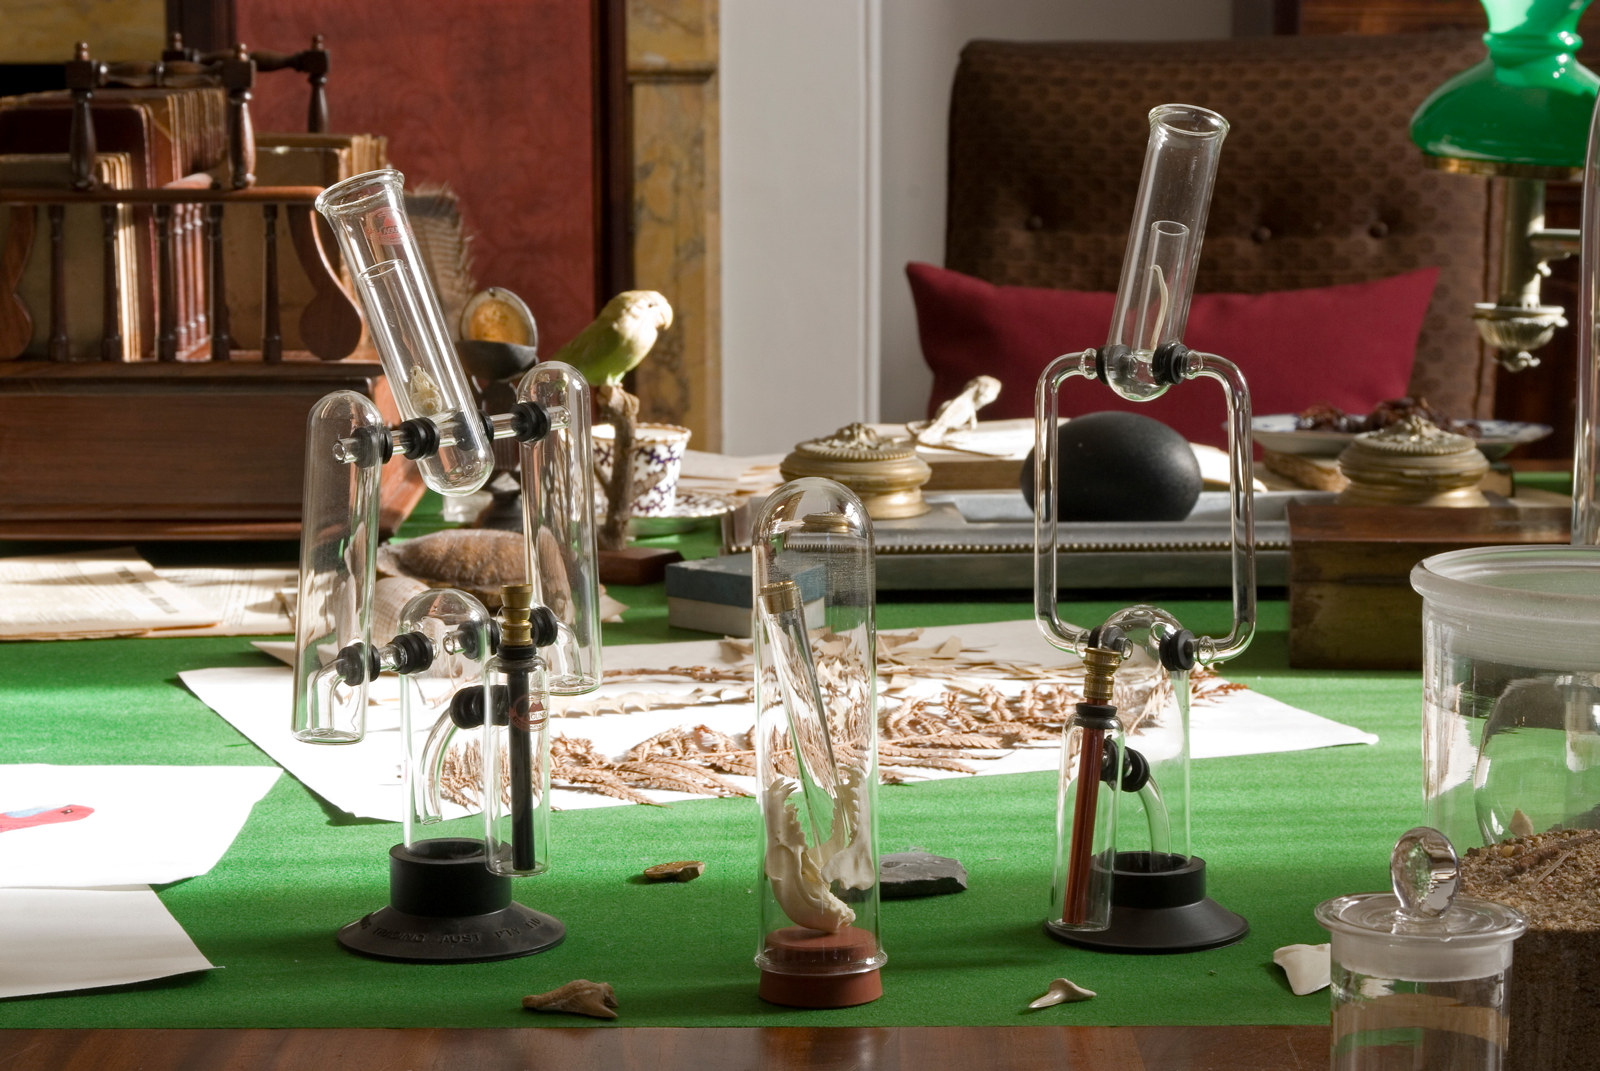 Glass objects that a 19th century specimen collector would have used